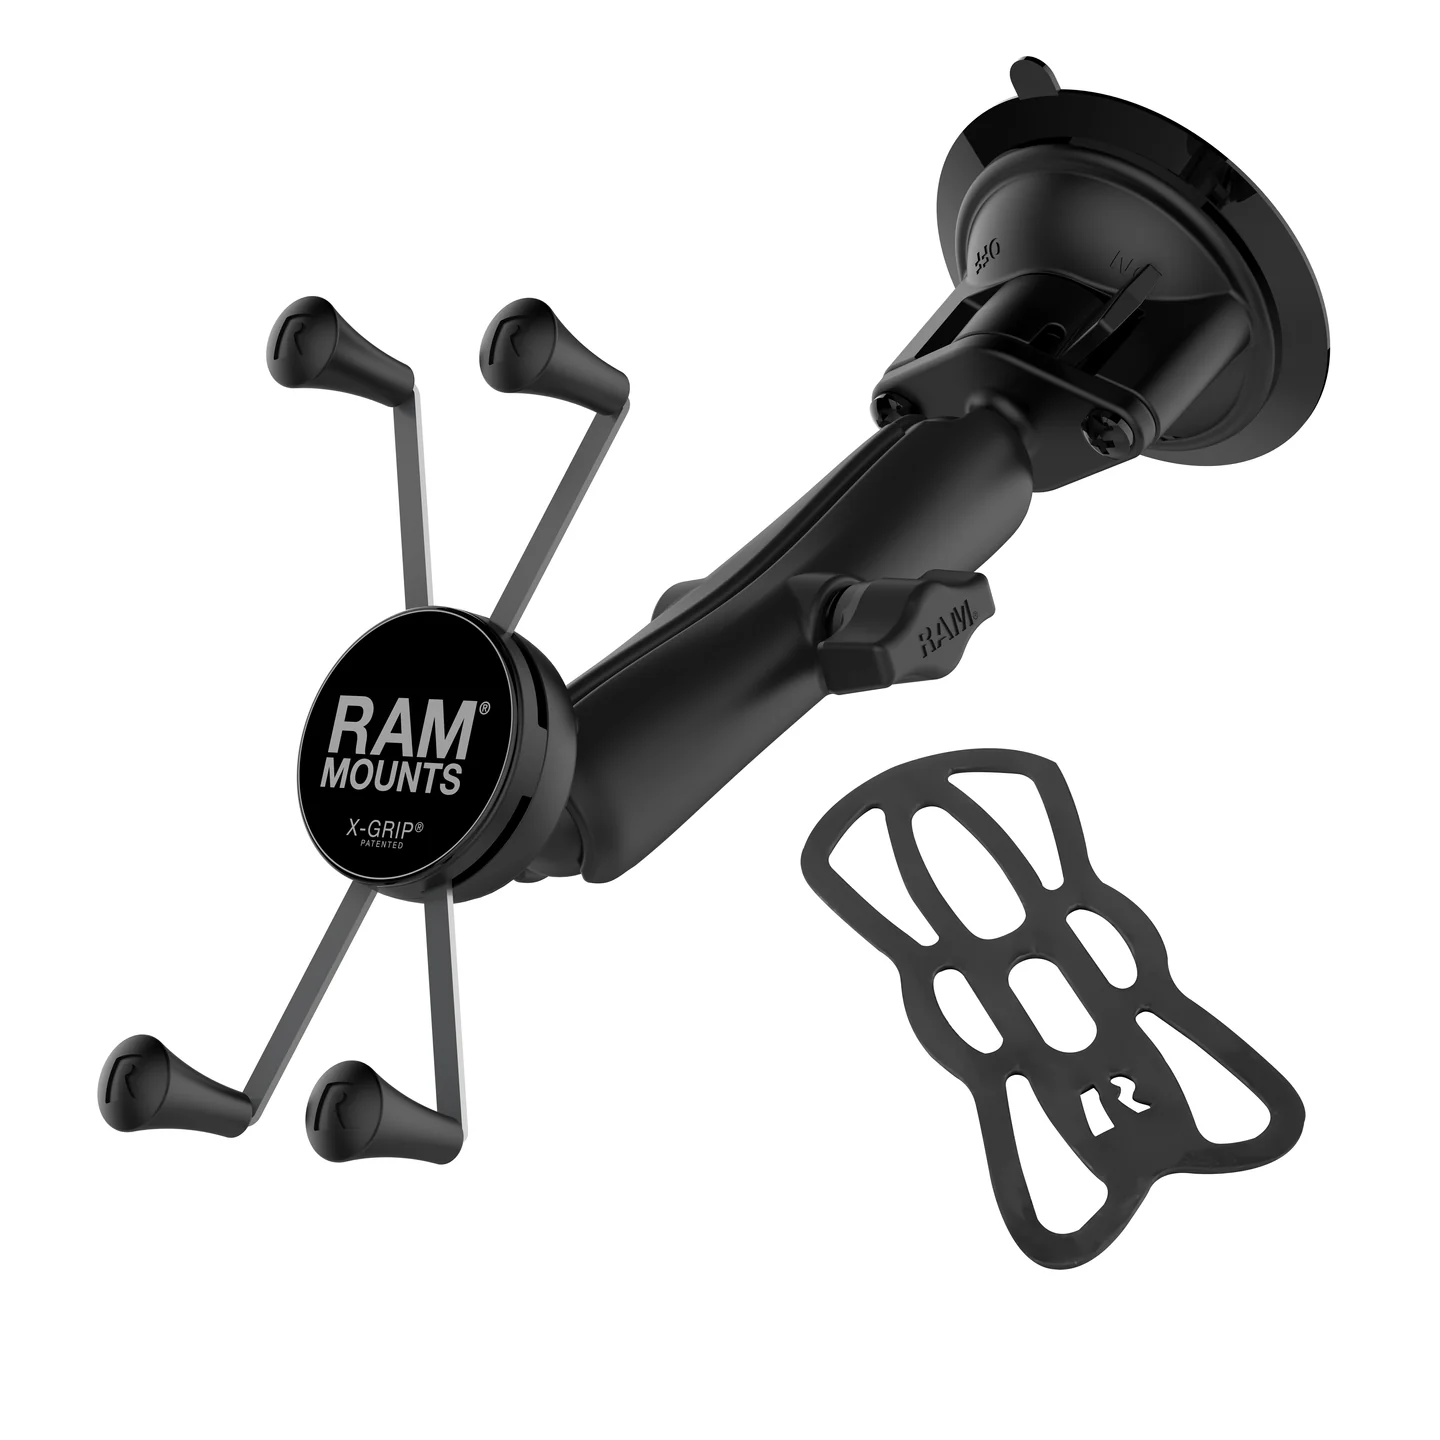 RAM Mounts X-Grip® Large Phone Mount with Twist-Lock™ Suction Cup - Long -  Online Boating Store - Boat Parts